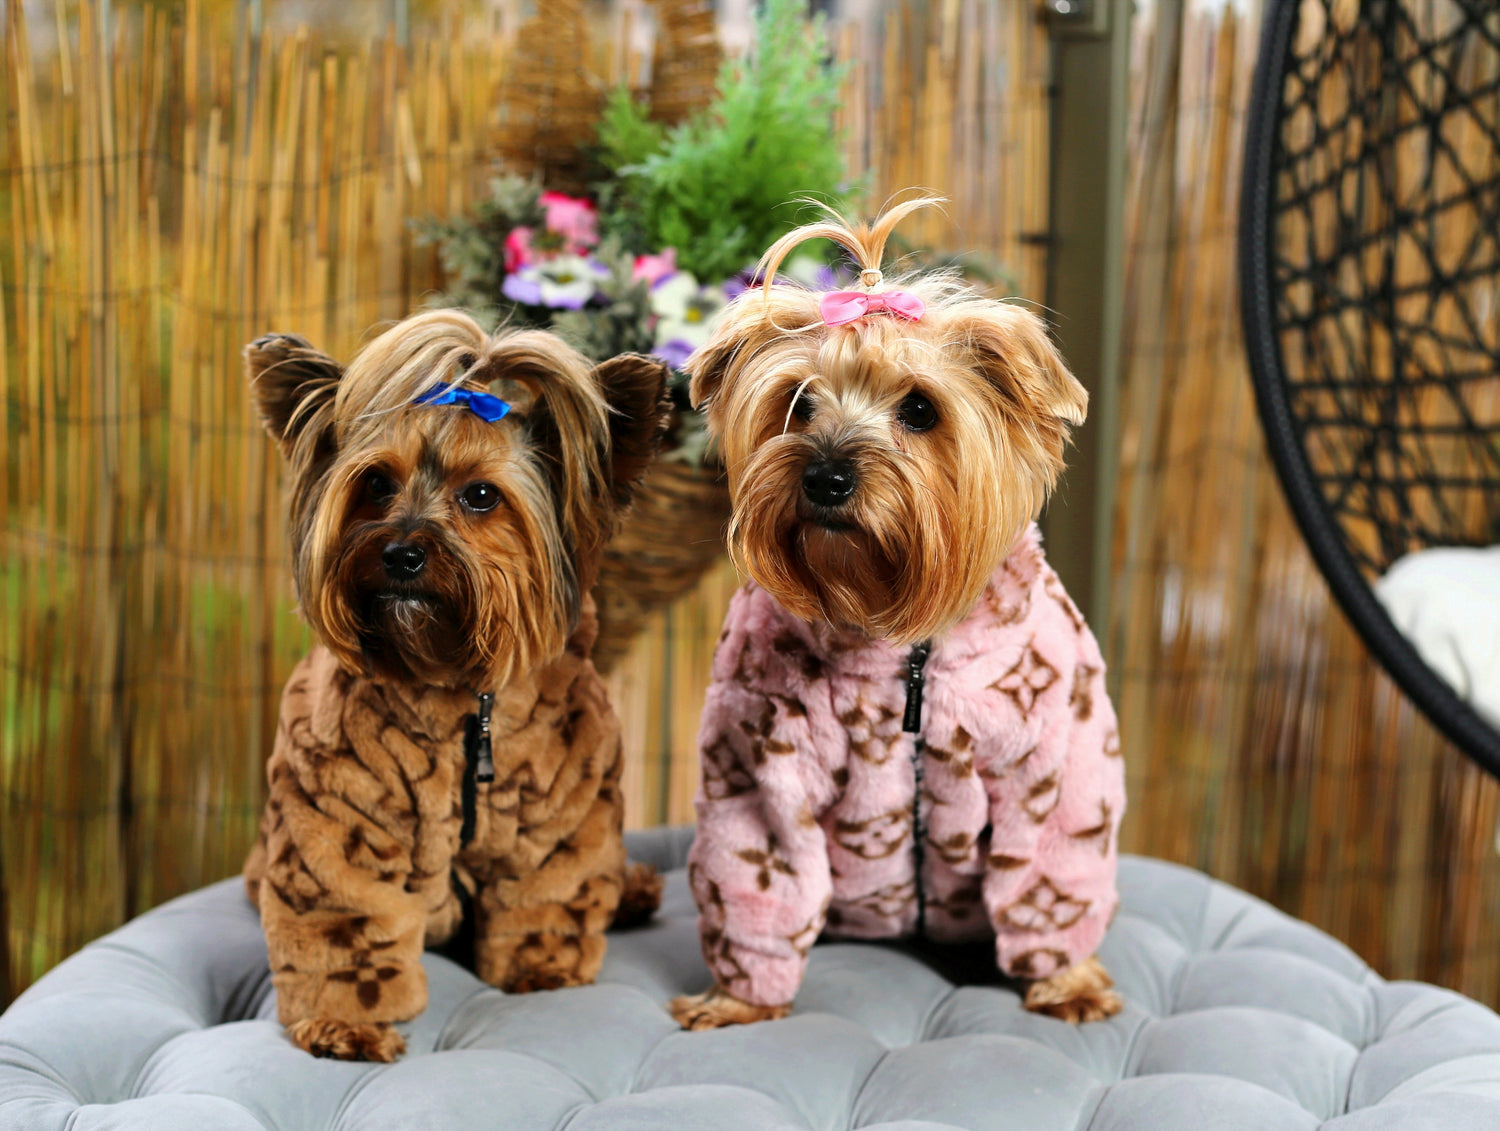 How to choose the right outfit for your canine